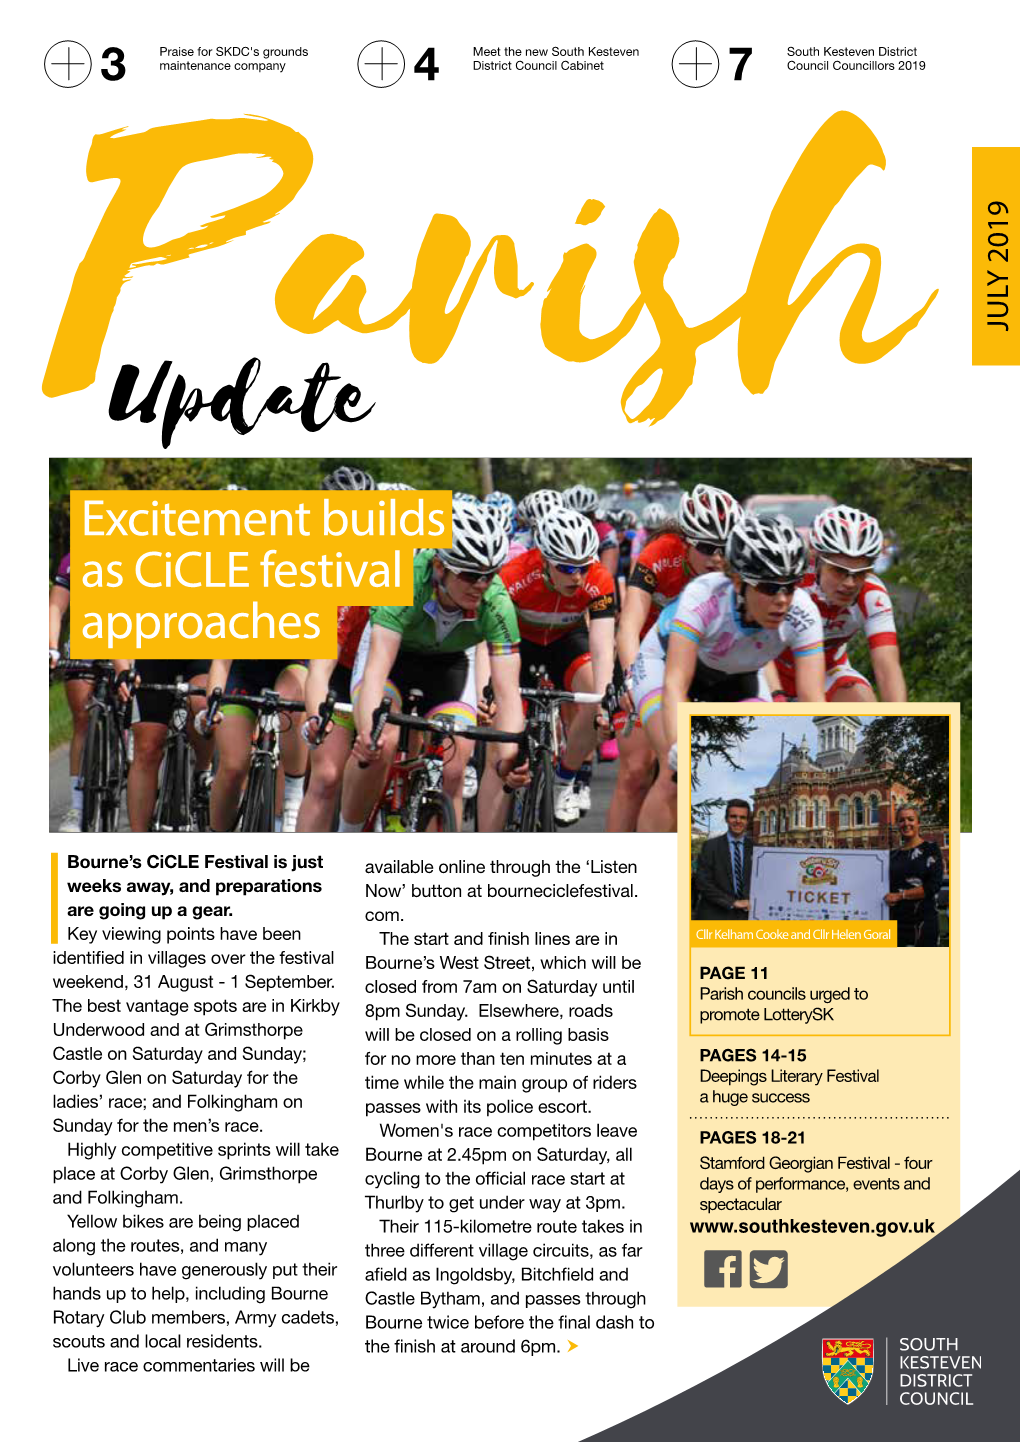 Update Excitement Builds As Cicle Festival Approaches